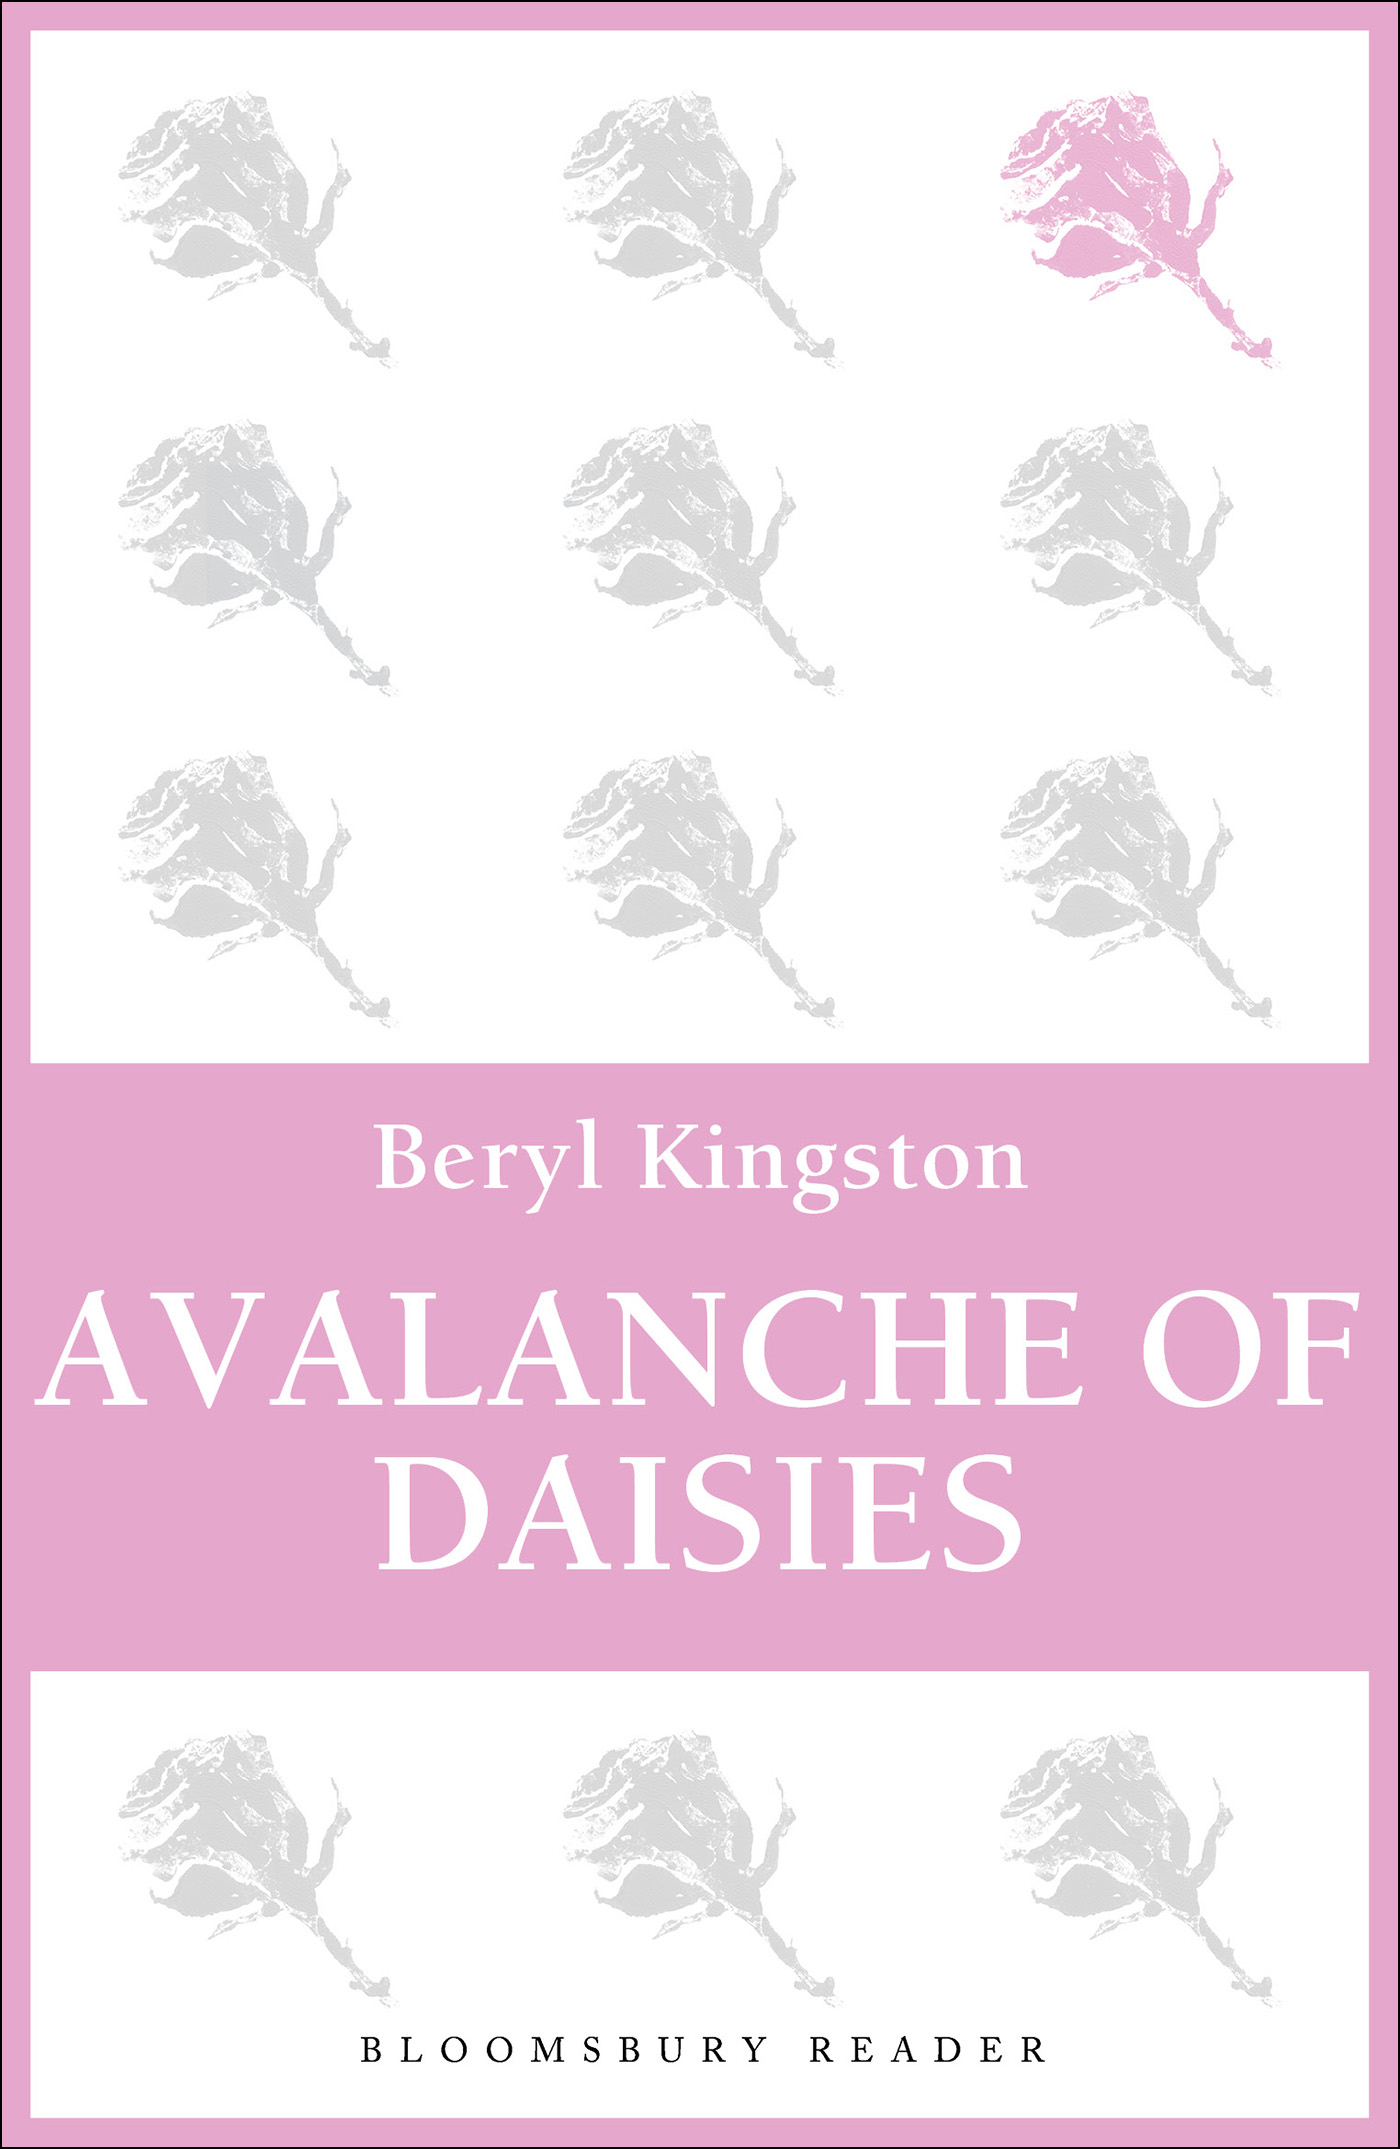 Avalanche of Daisies